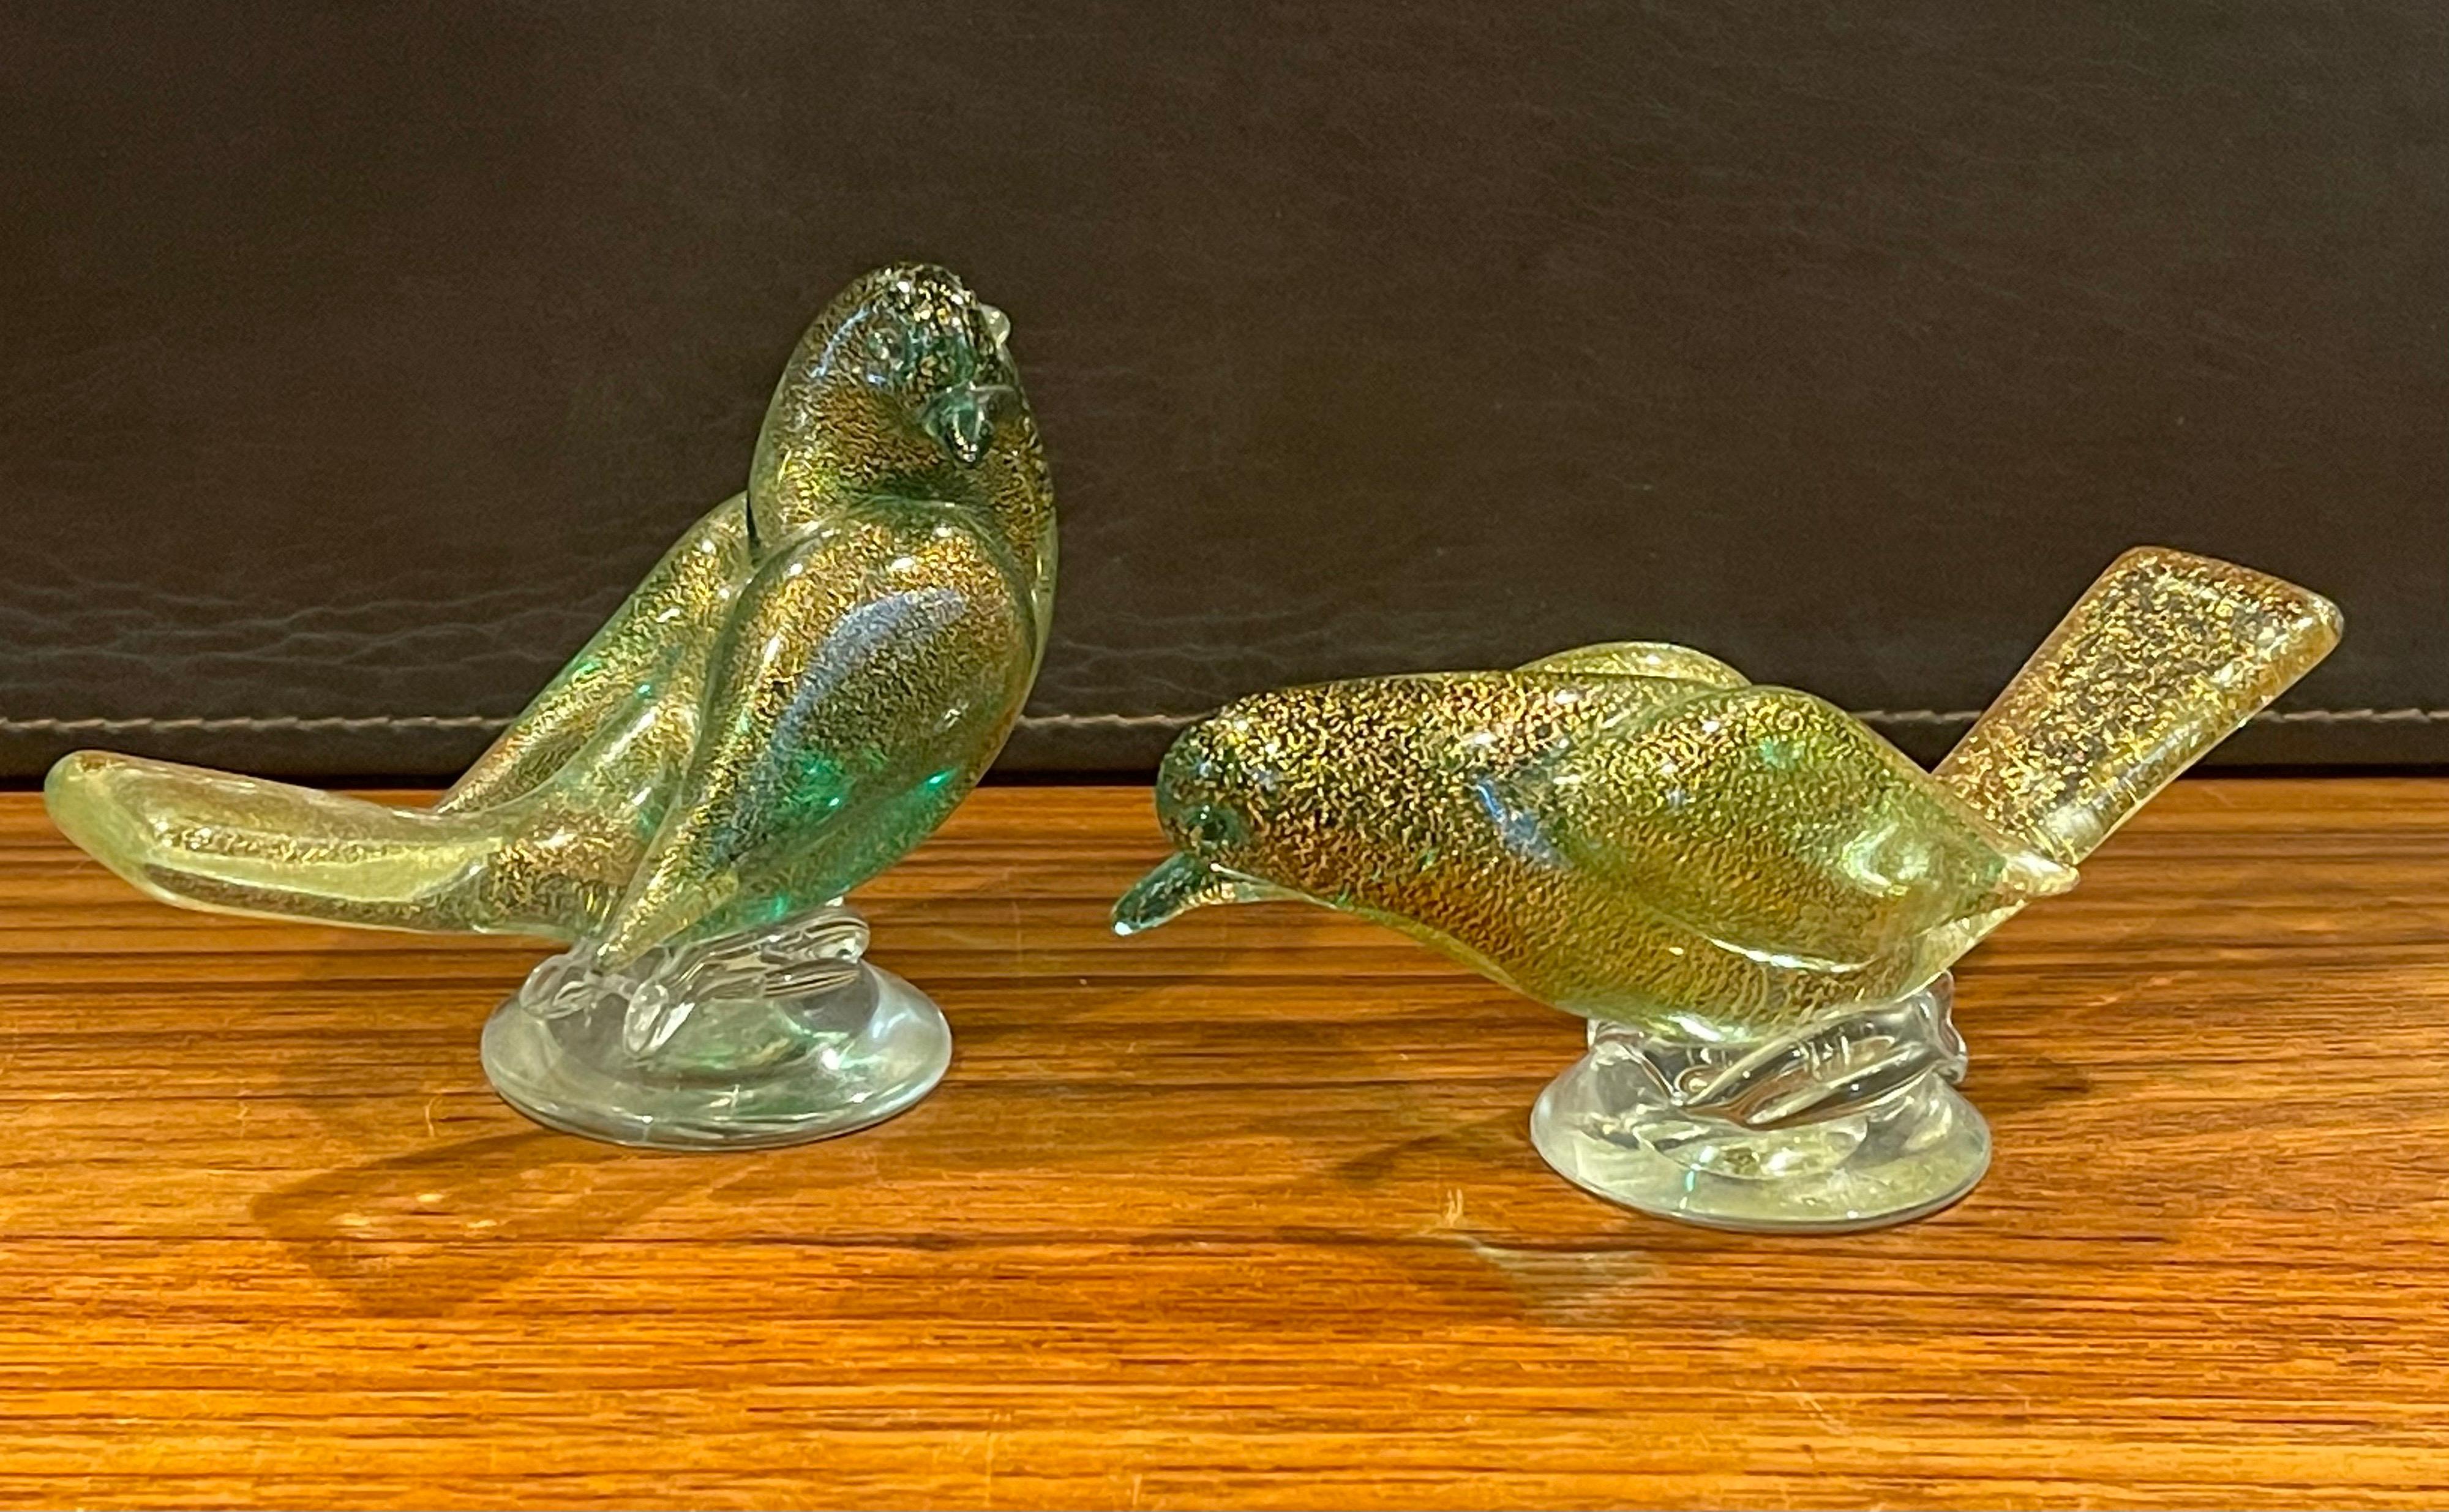 Nice pair of art glass song birds / sparrows by Murano glass studios, circa 1970s in a green / gold / clear sommerso style glass with gold speckles. The first bird measures 2.5